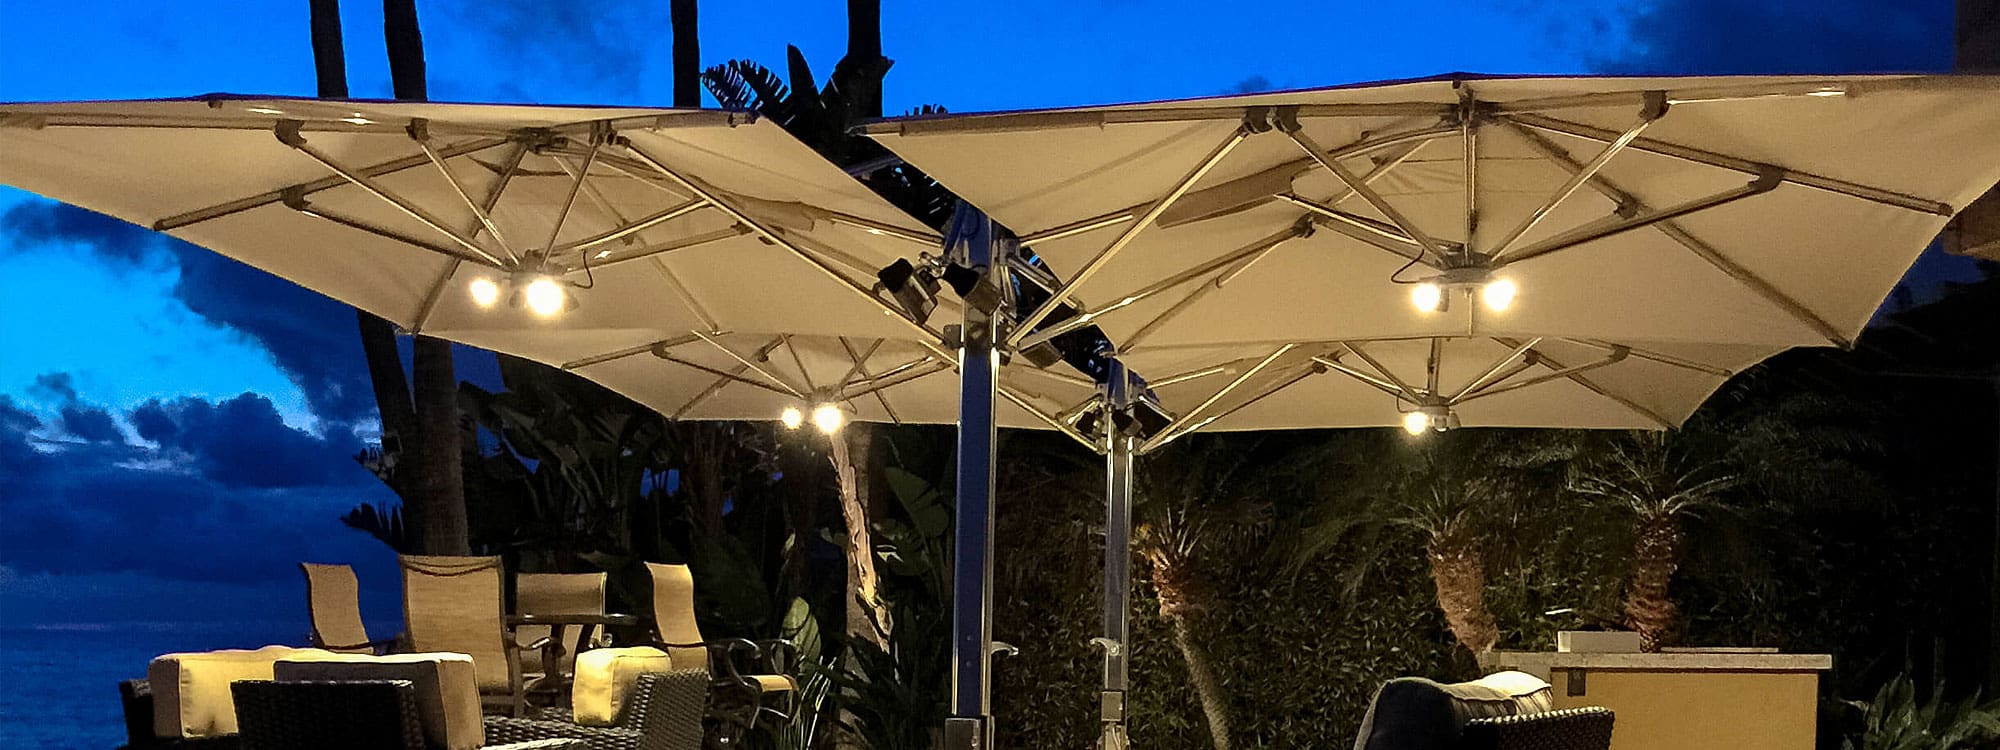 Nighttime image of Tuuci Ocean Master Max Classic Dual cantilever parasols fitted with lights and heating